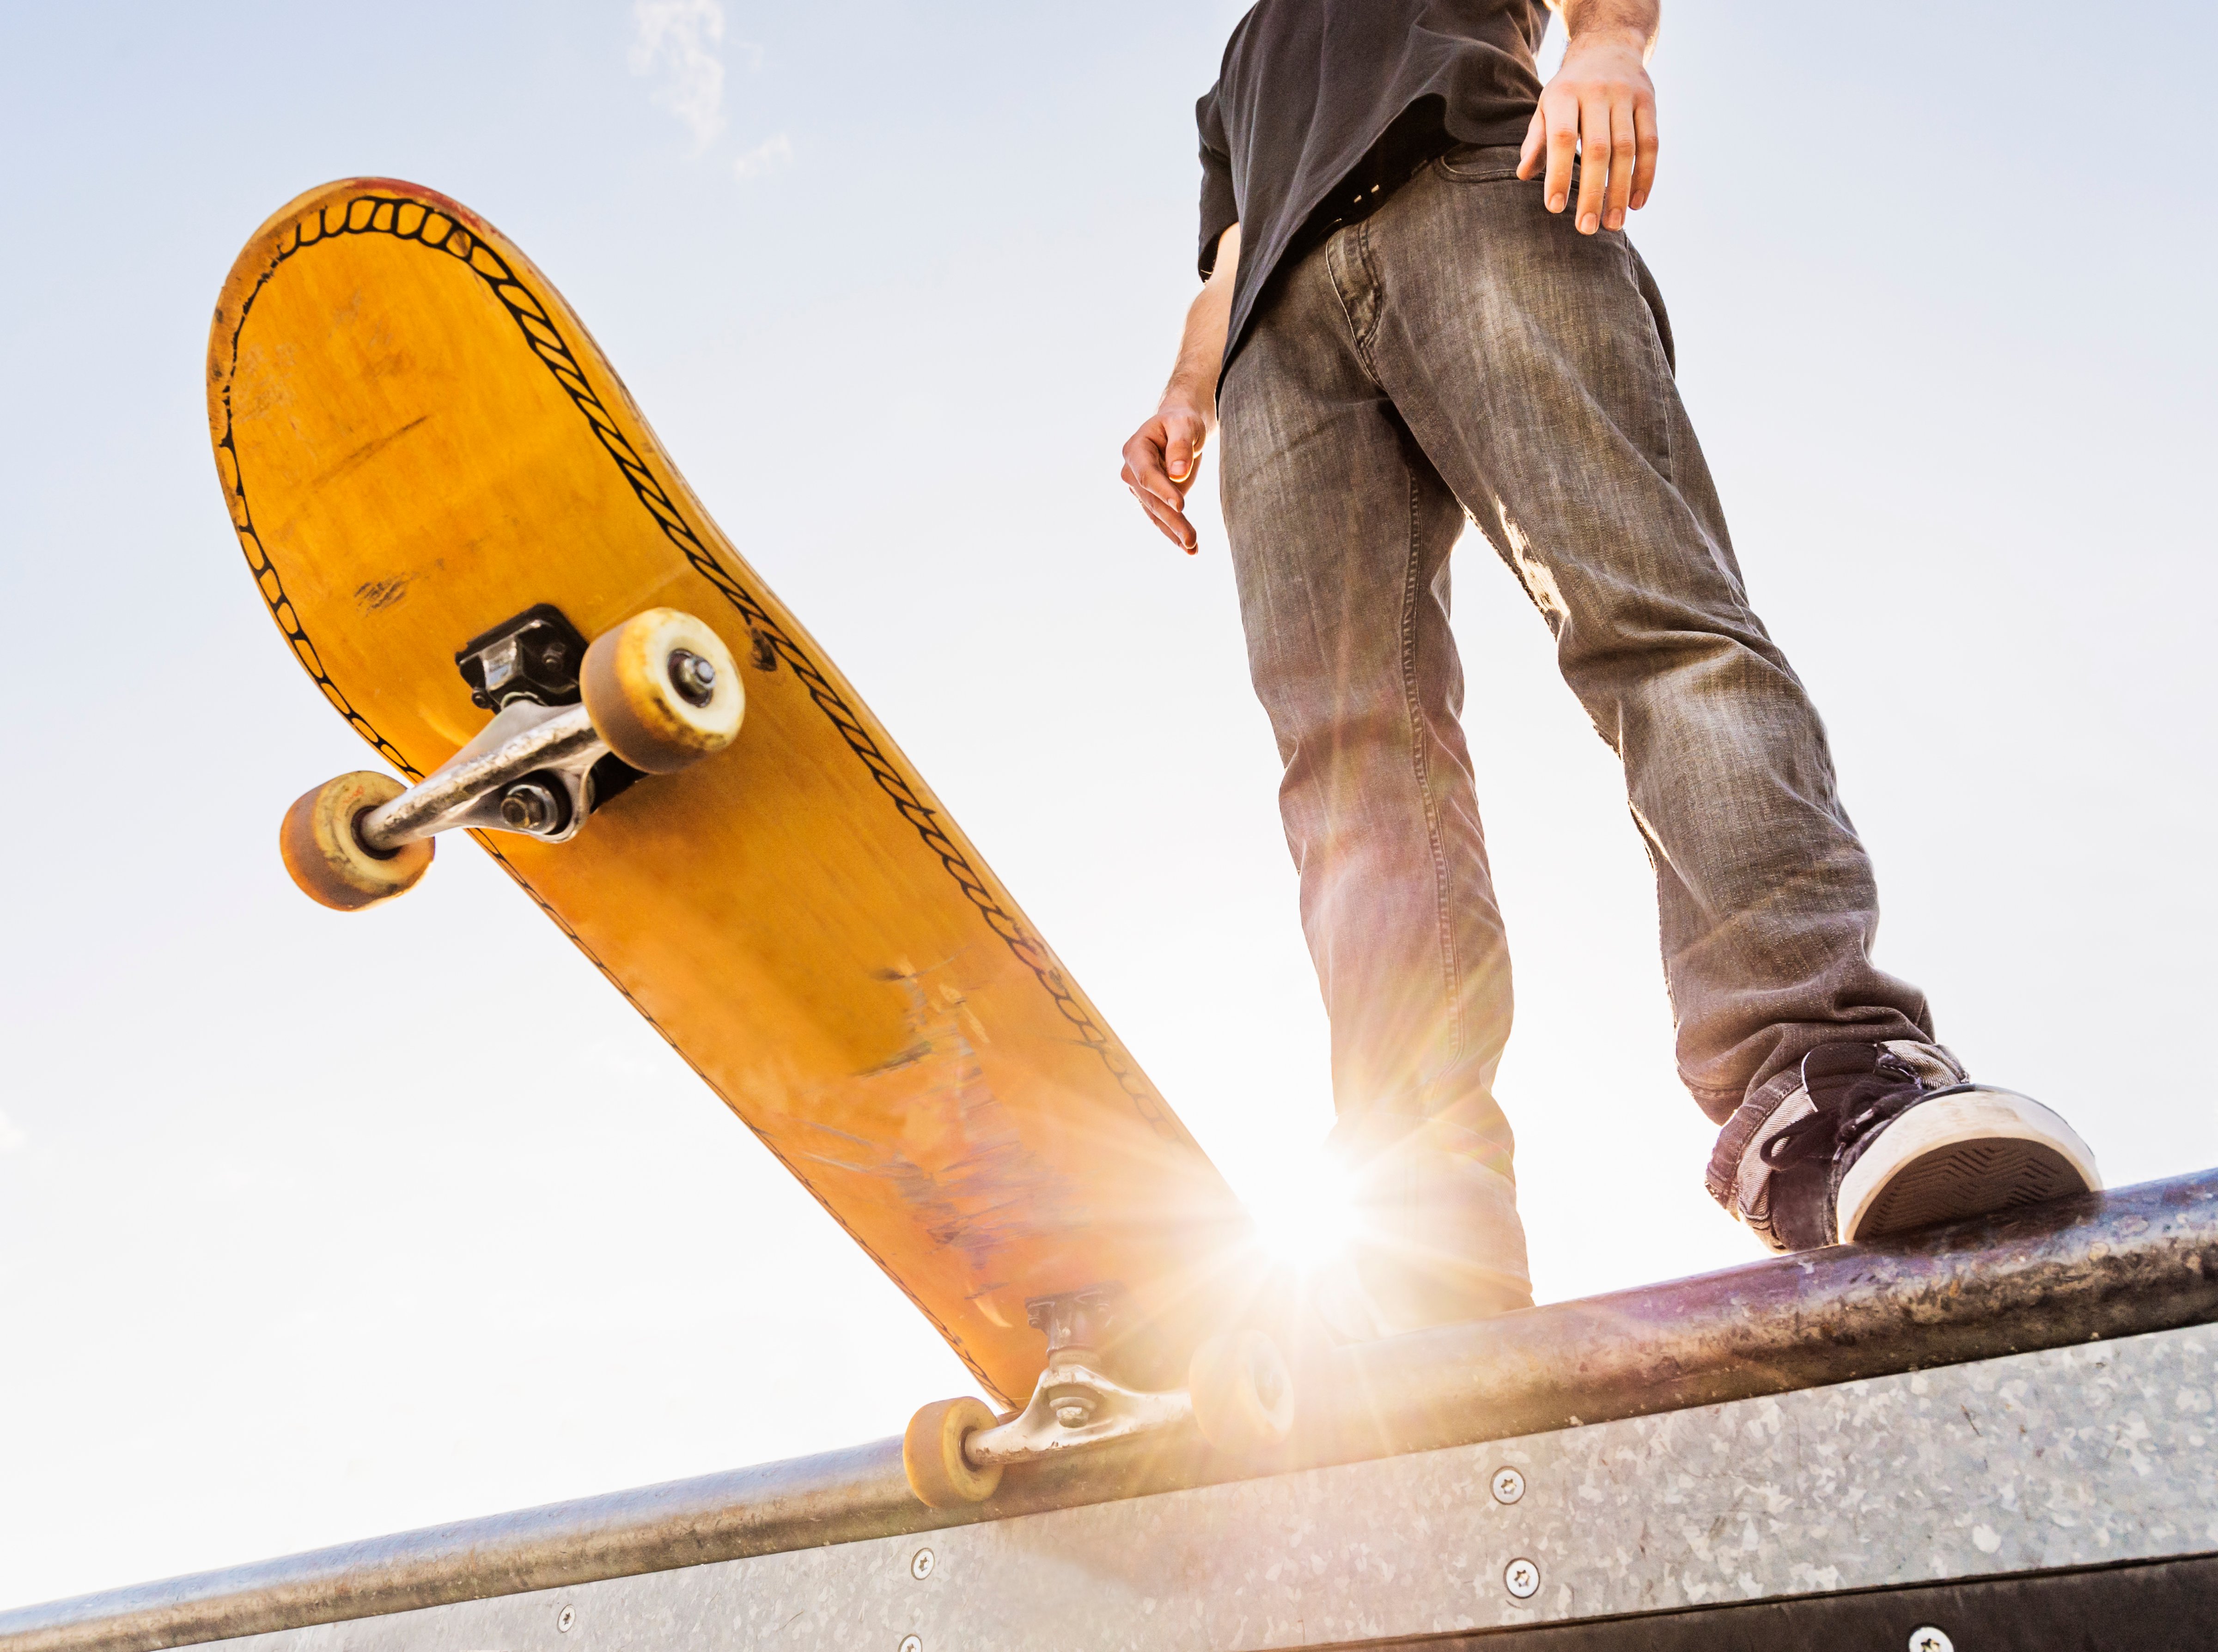 Man with skateboard at the edge of ramp (Daniel Grill—Getty Images/Tetra images RF)